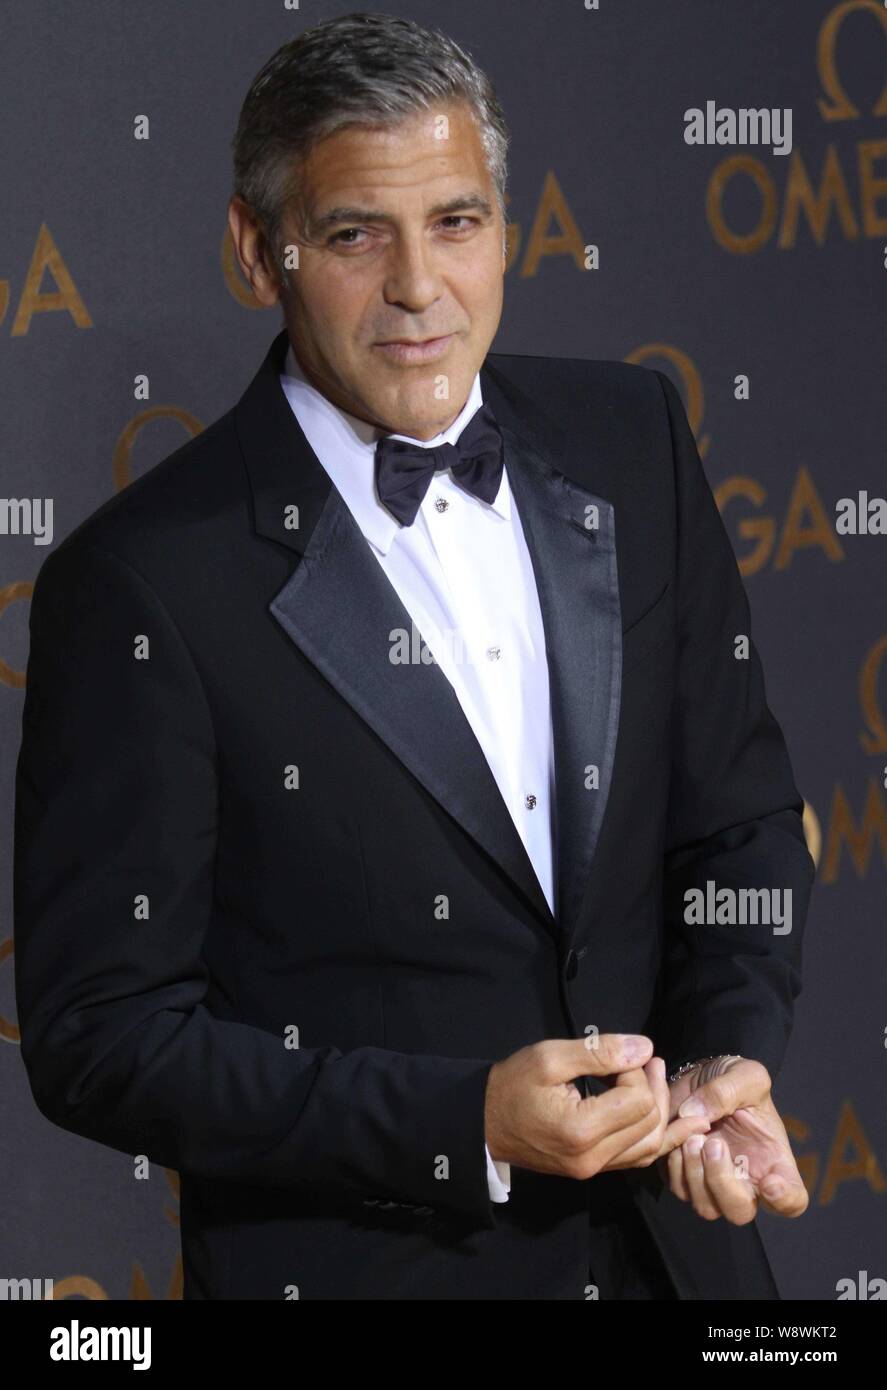 American actor George Clooney poses as he arrives at the Omega Le Jardin Secret party in Shanghai, China, 16 May 2014.   Hollywood actor George Cloone Stock Photo